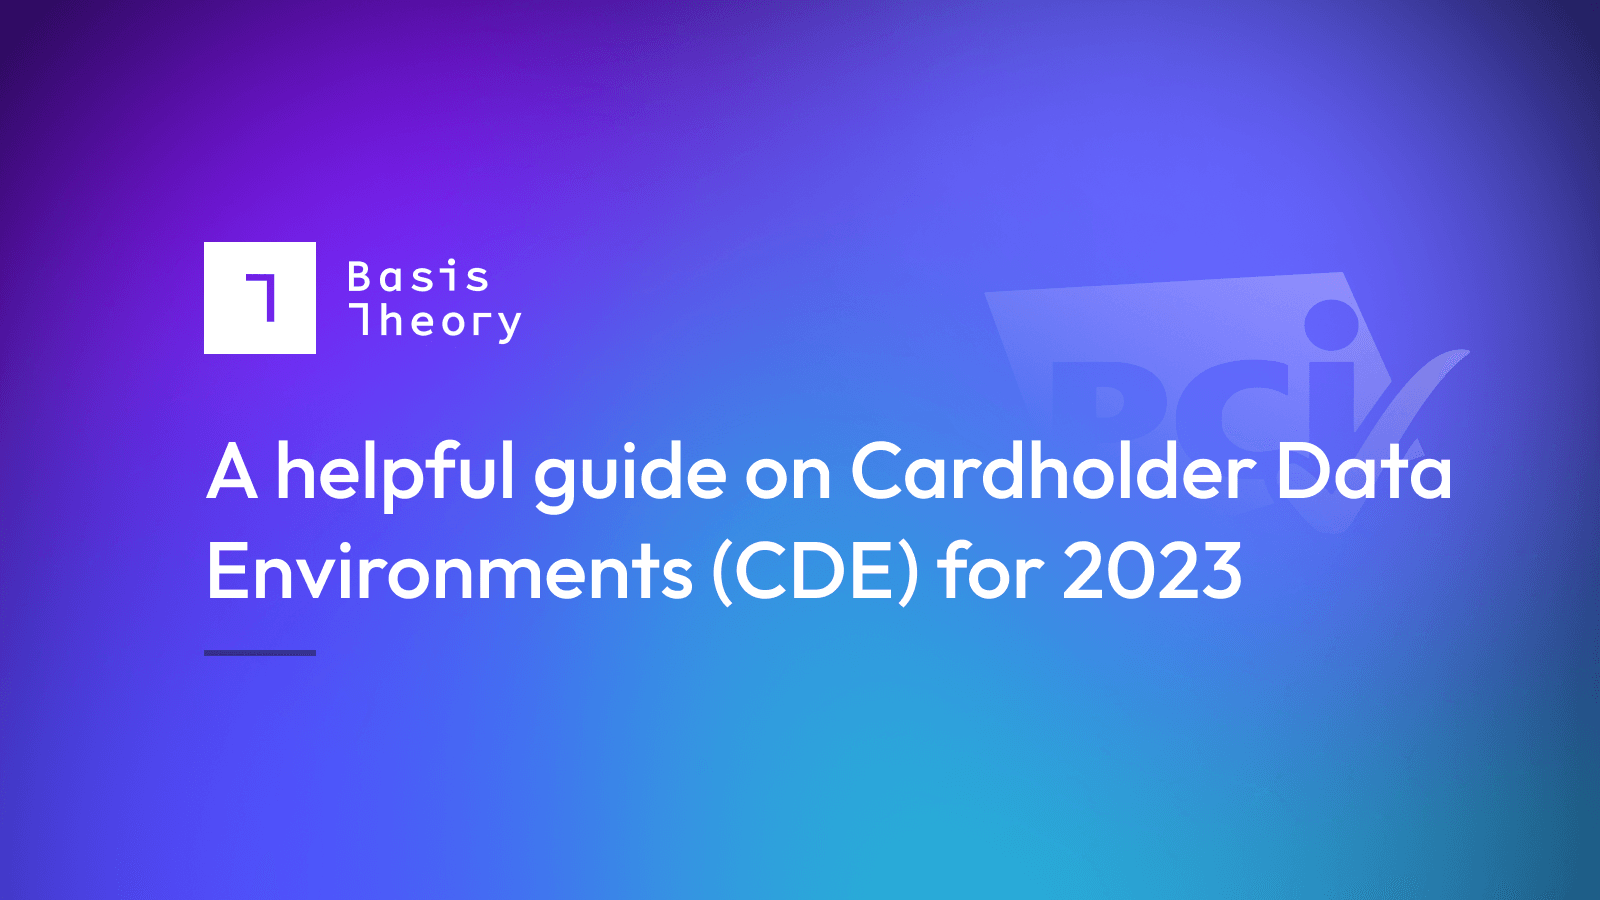 A helpful guide to CDEs